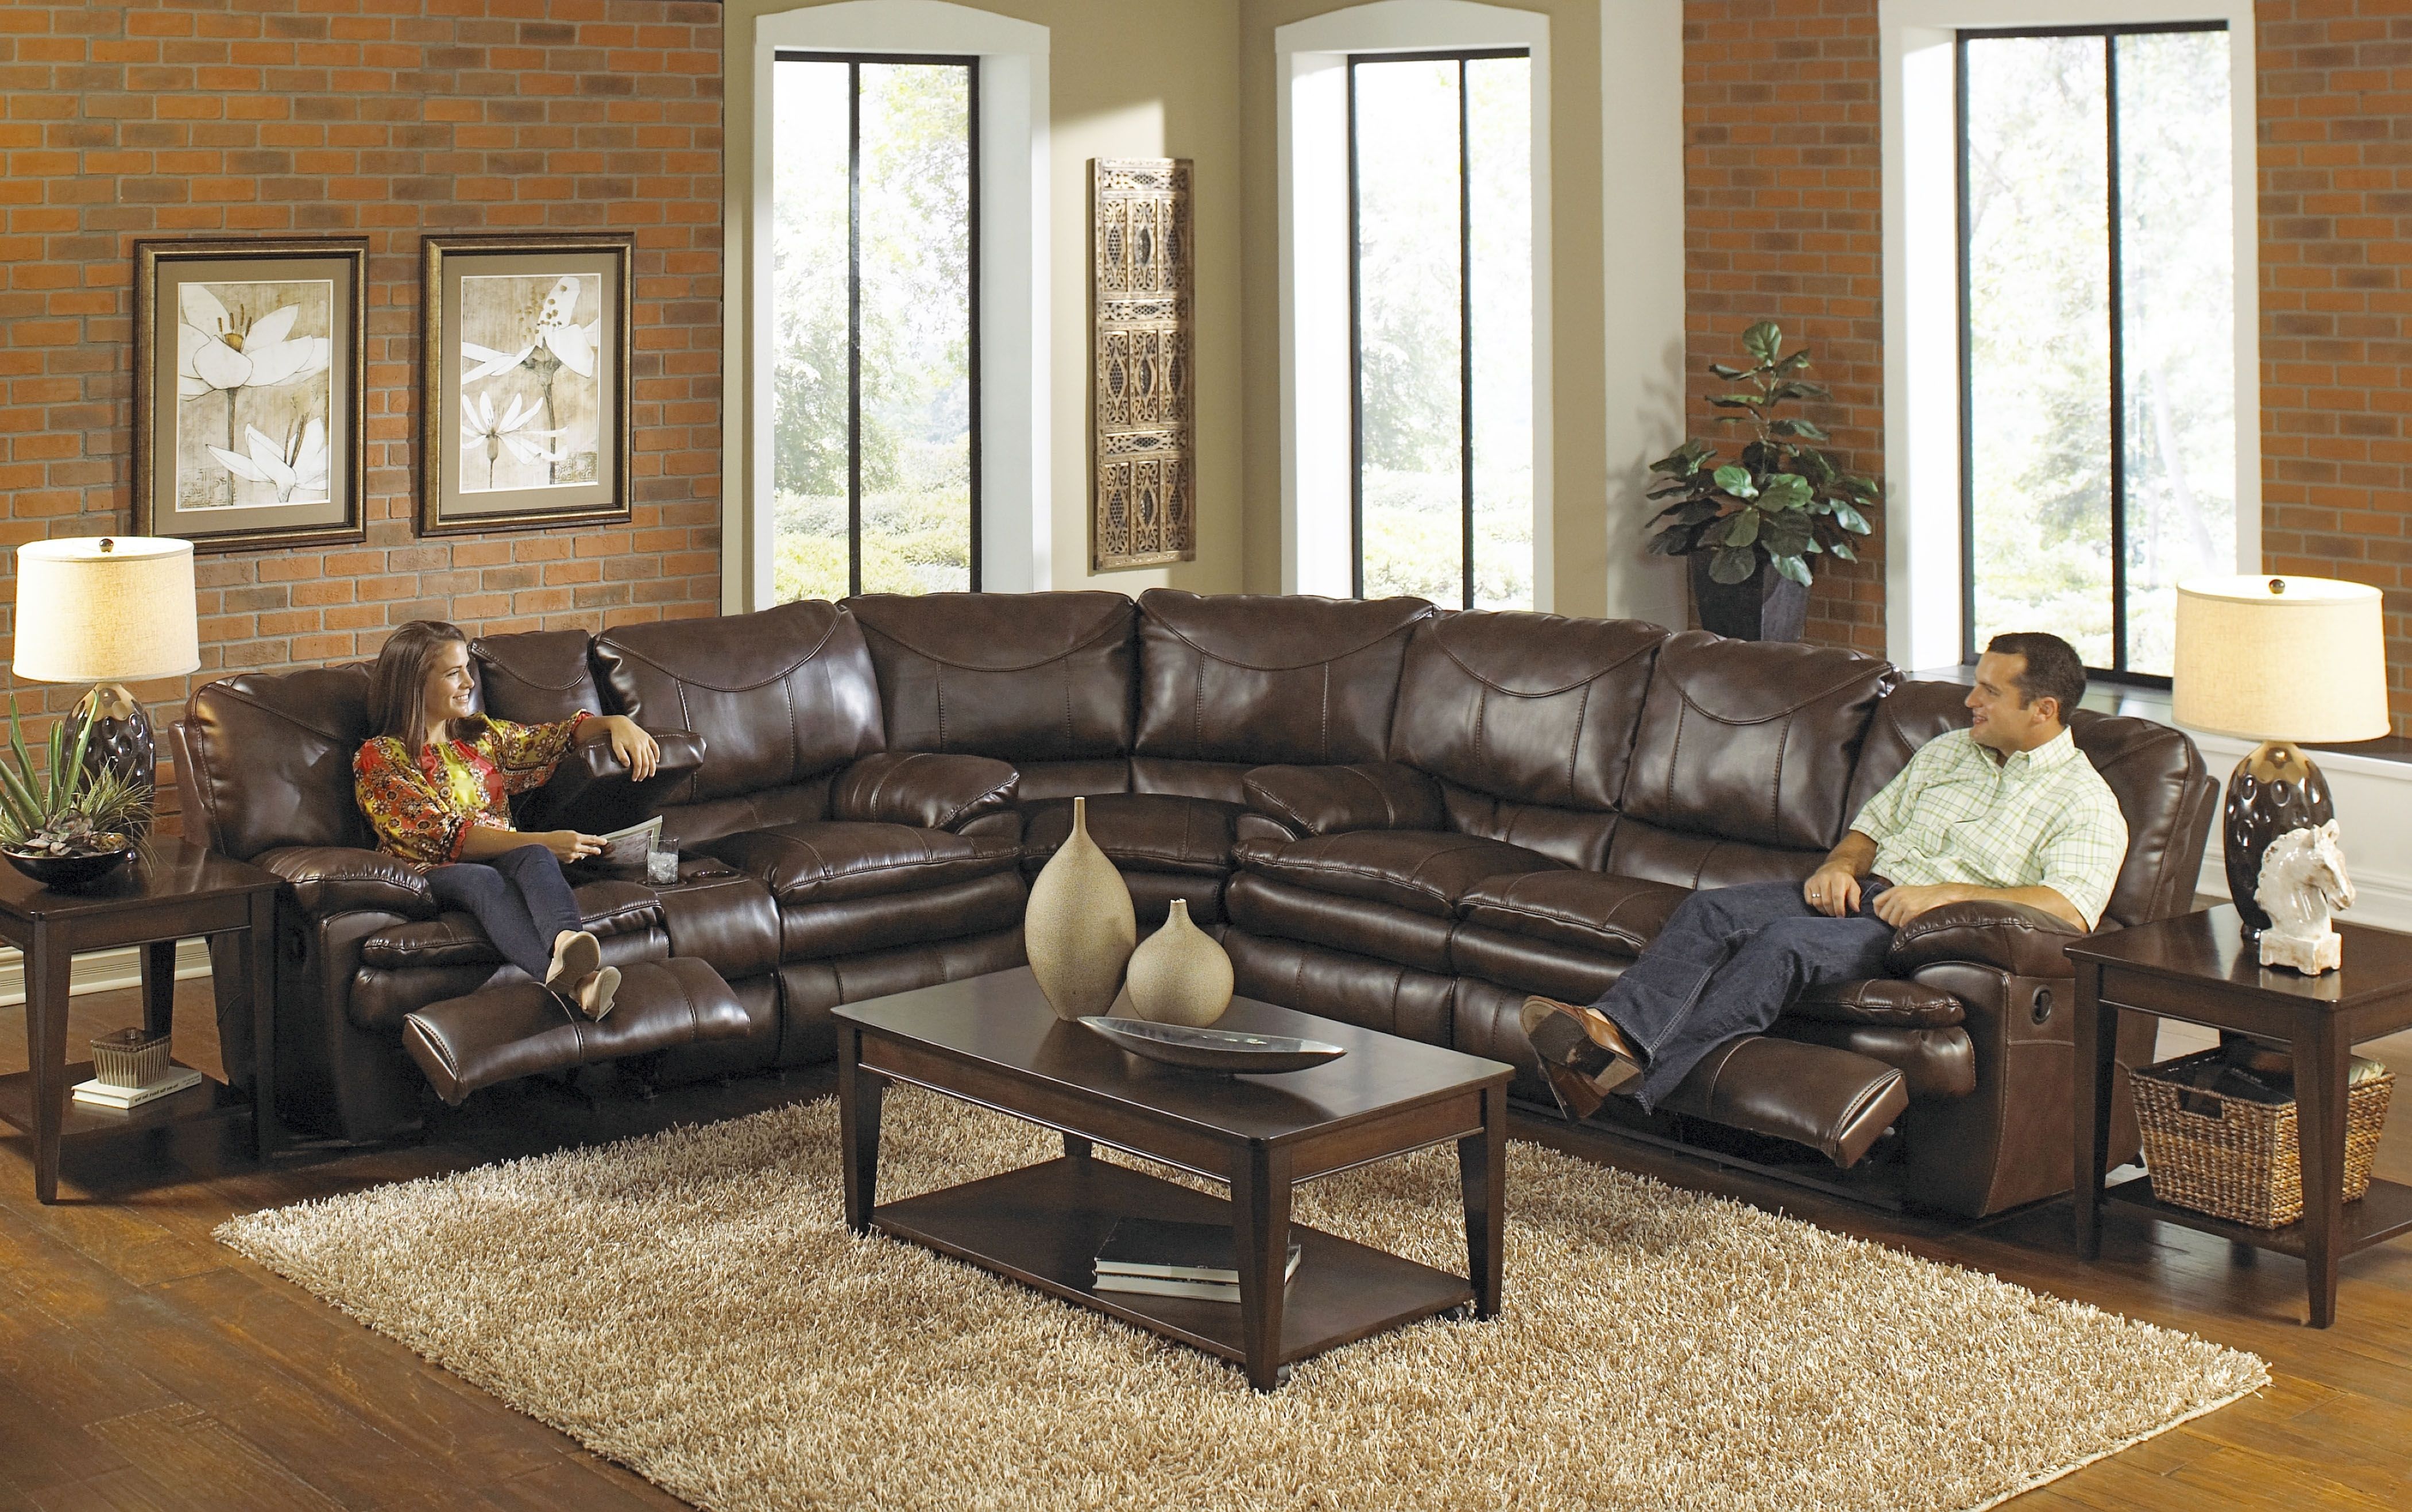 An Overview Of Sectional Sofas With Recliner – Elites Home Decor Pertaining To Current Leather Motion Sectional Sofas (View 5 of 15)